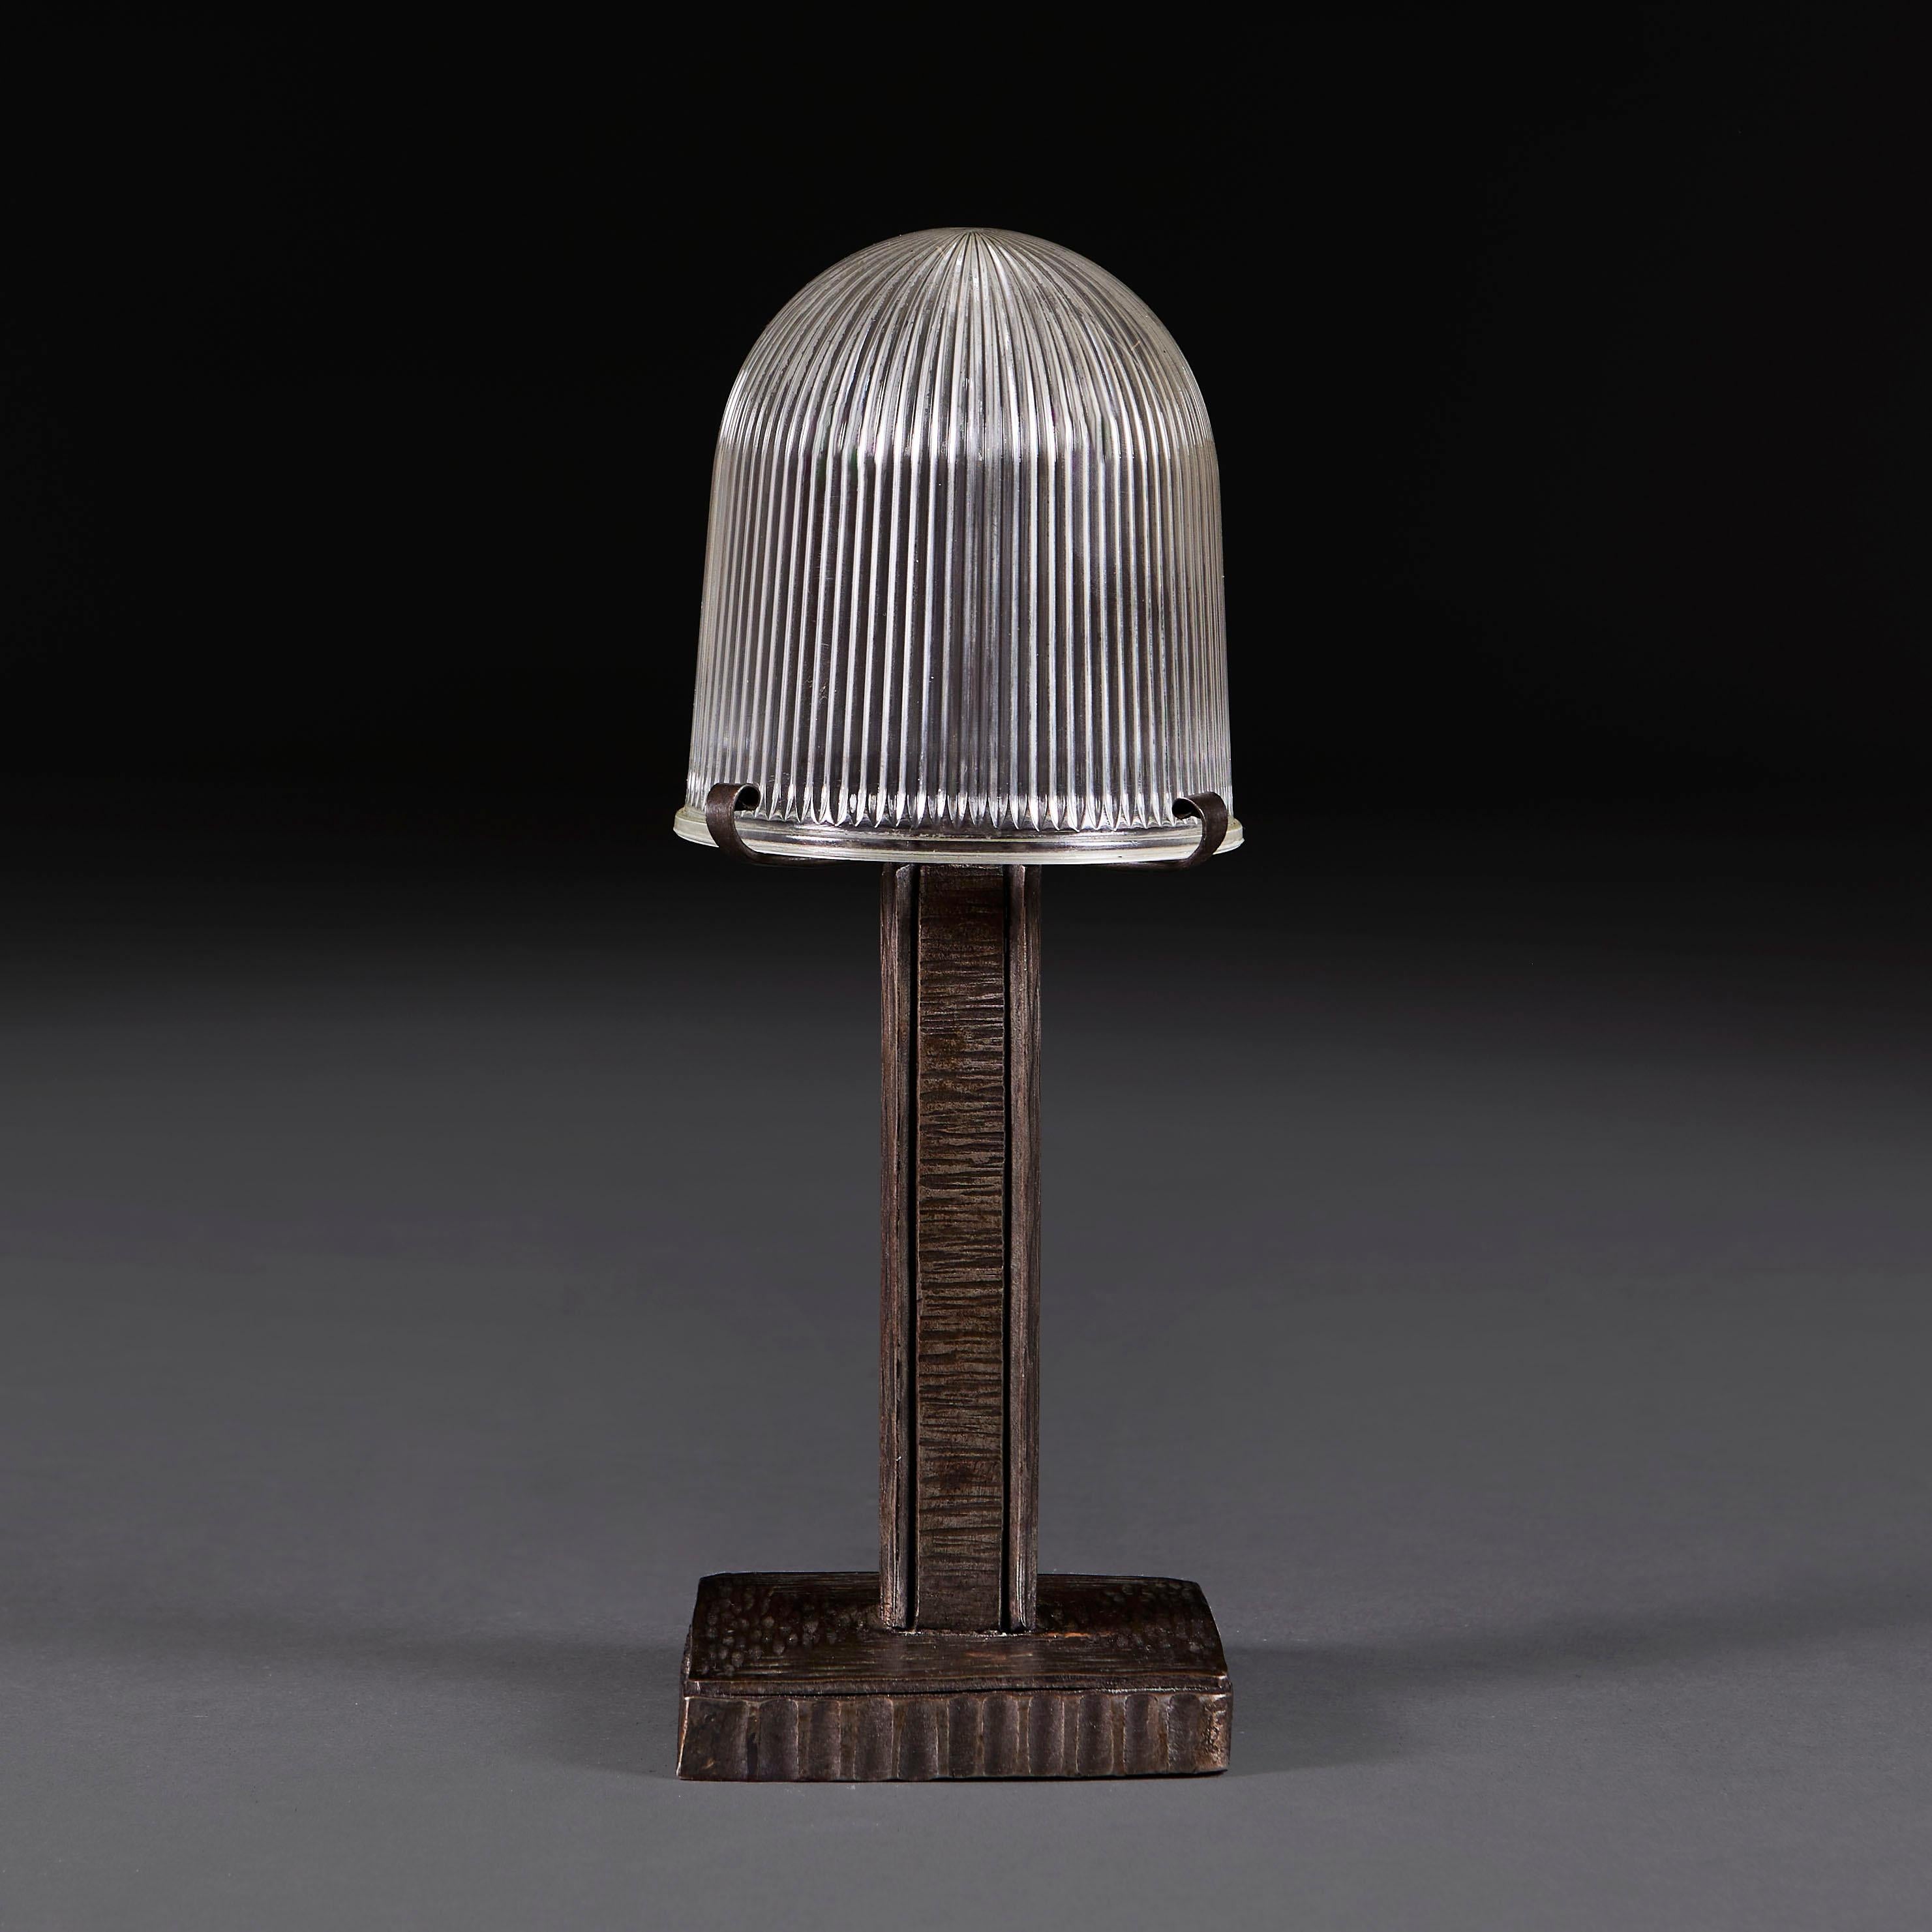 France, circa 1920

A small Art Deco wrought iron desk lamp with square plinth base, the stem decorated with horizontal incised lines, supporting a ribbed domed glass shade.

Height 28.00cm
Width of base 10.00cm

Please note: This is currently wired